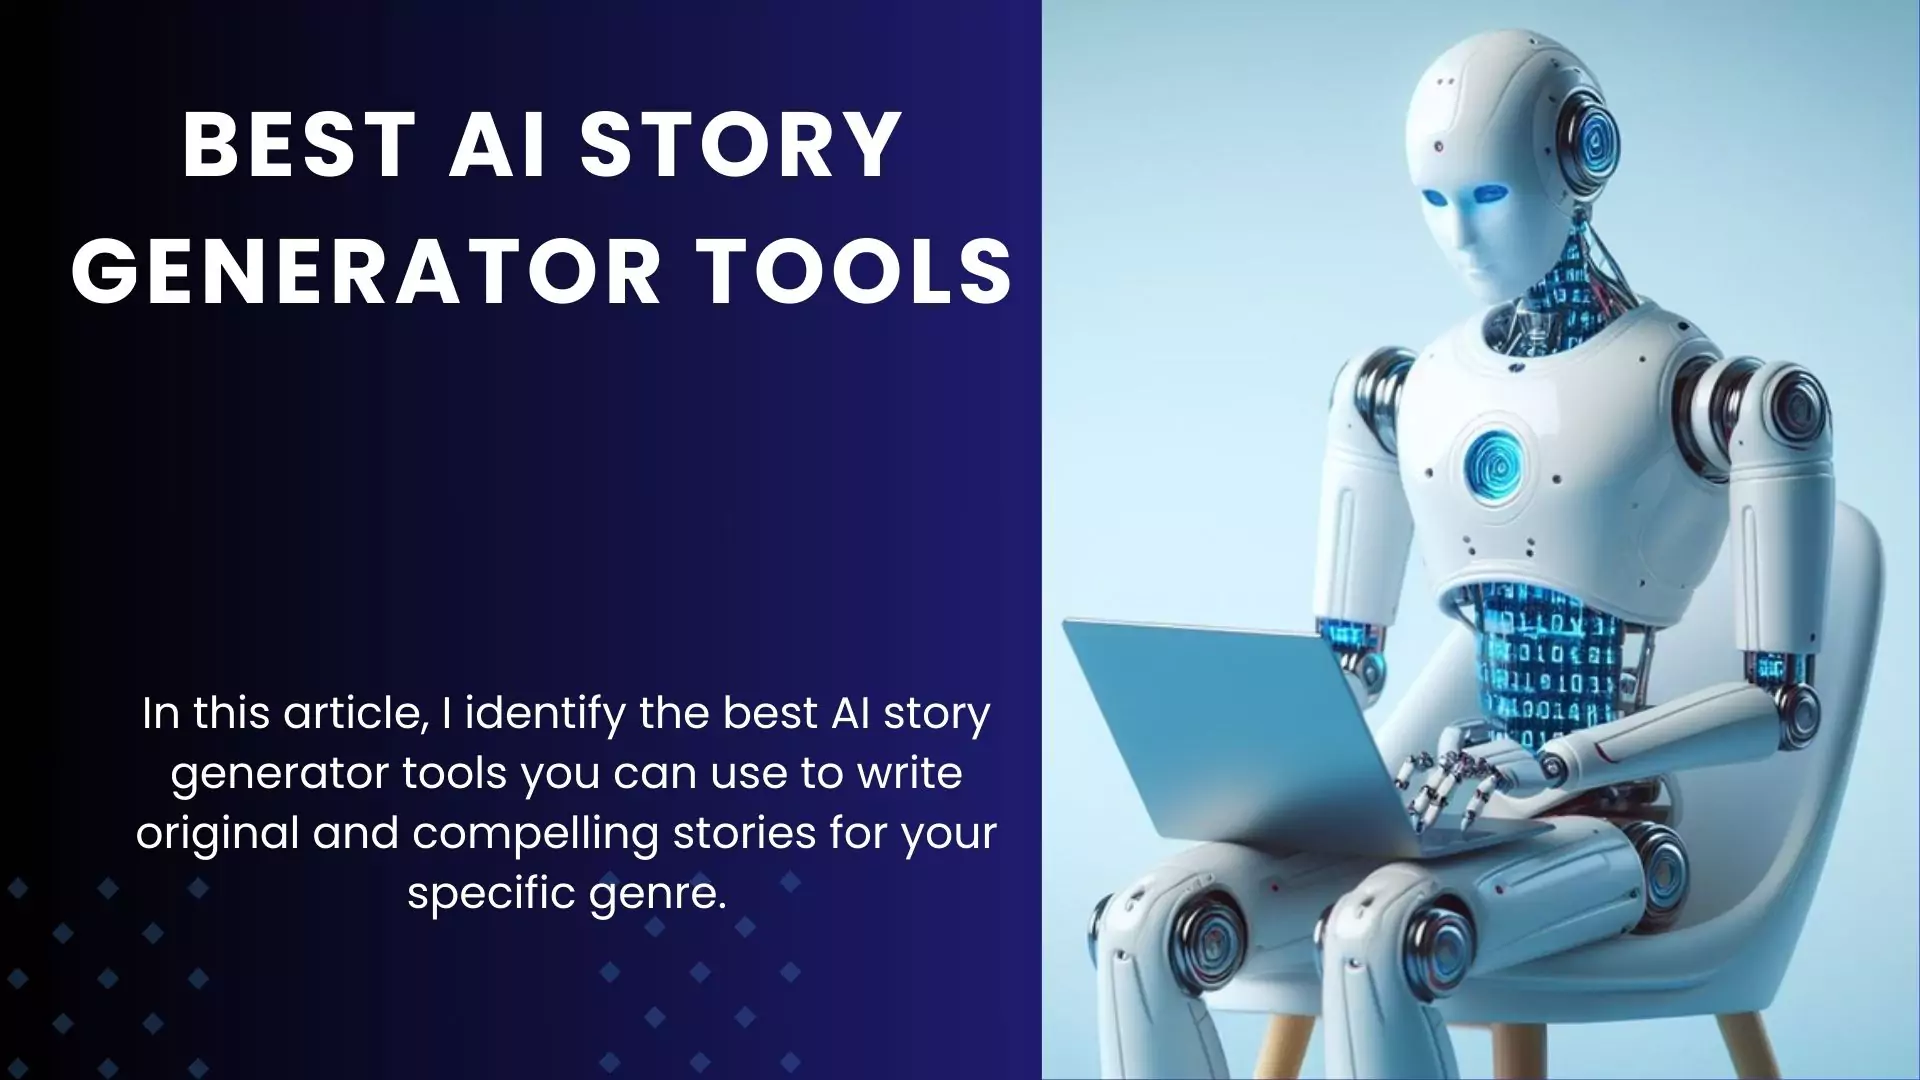 The best story generator tools featured image